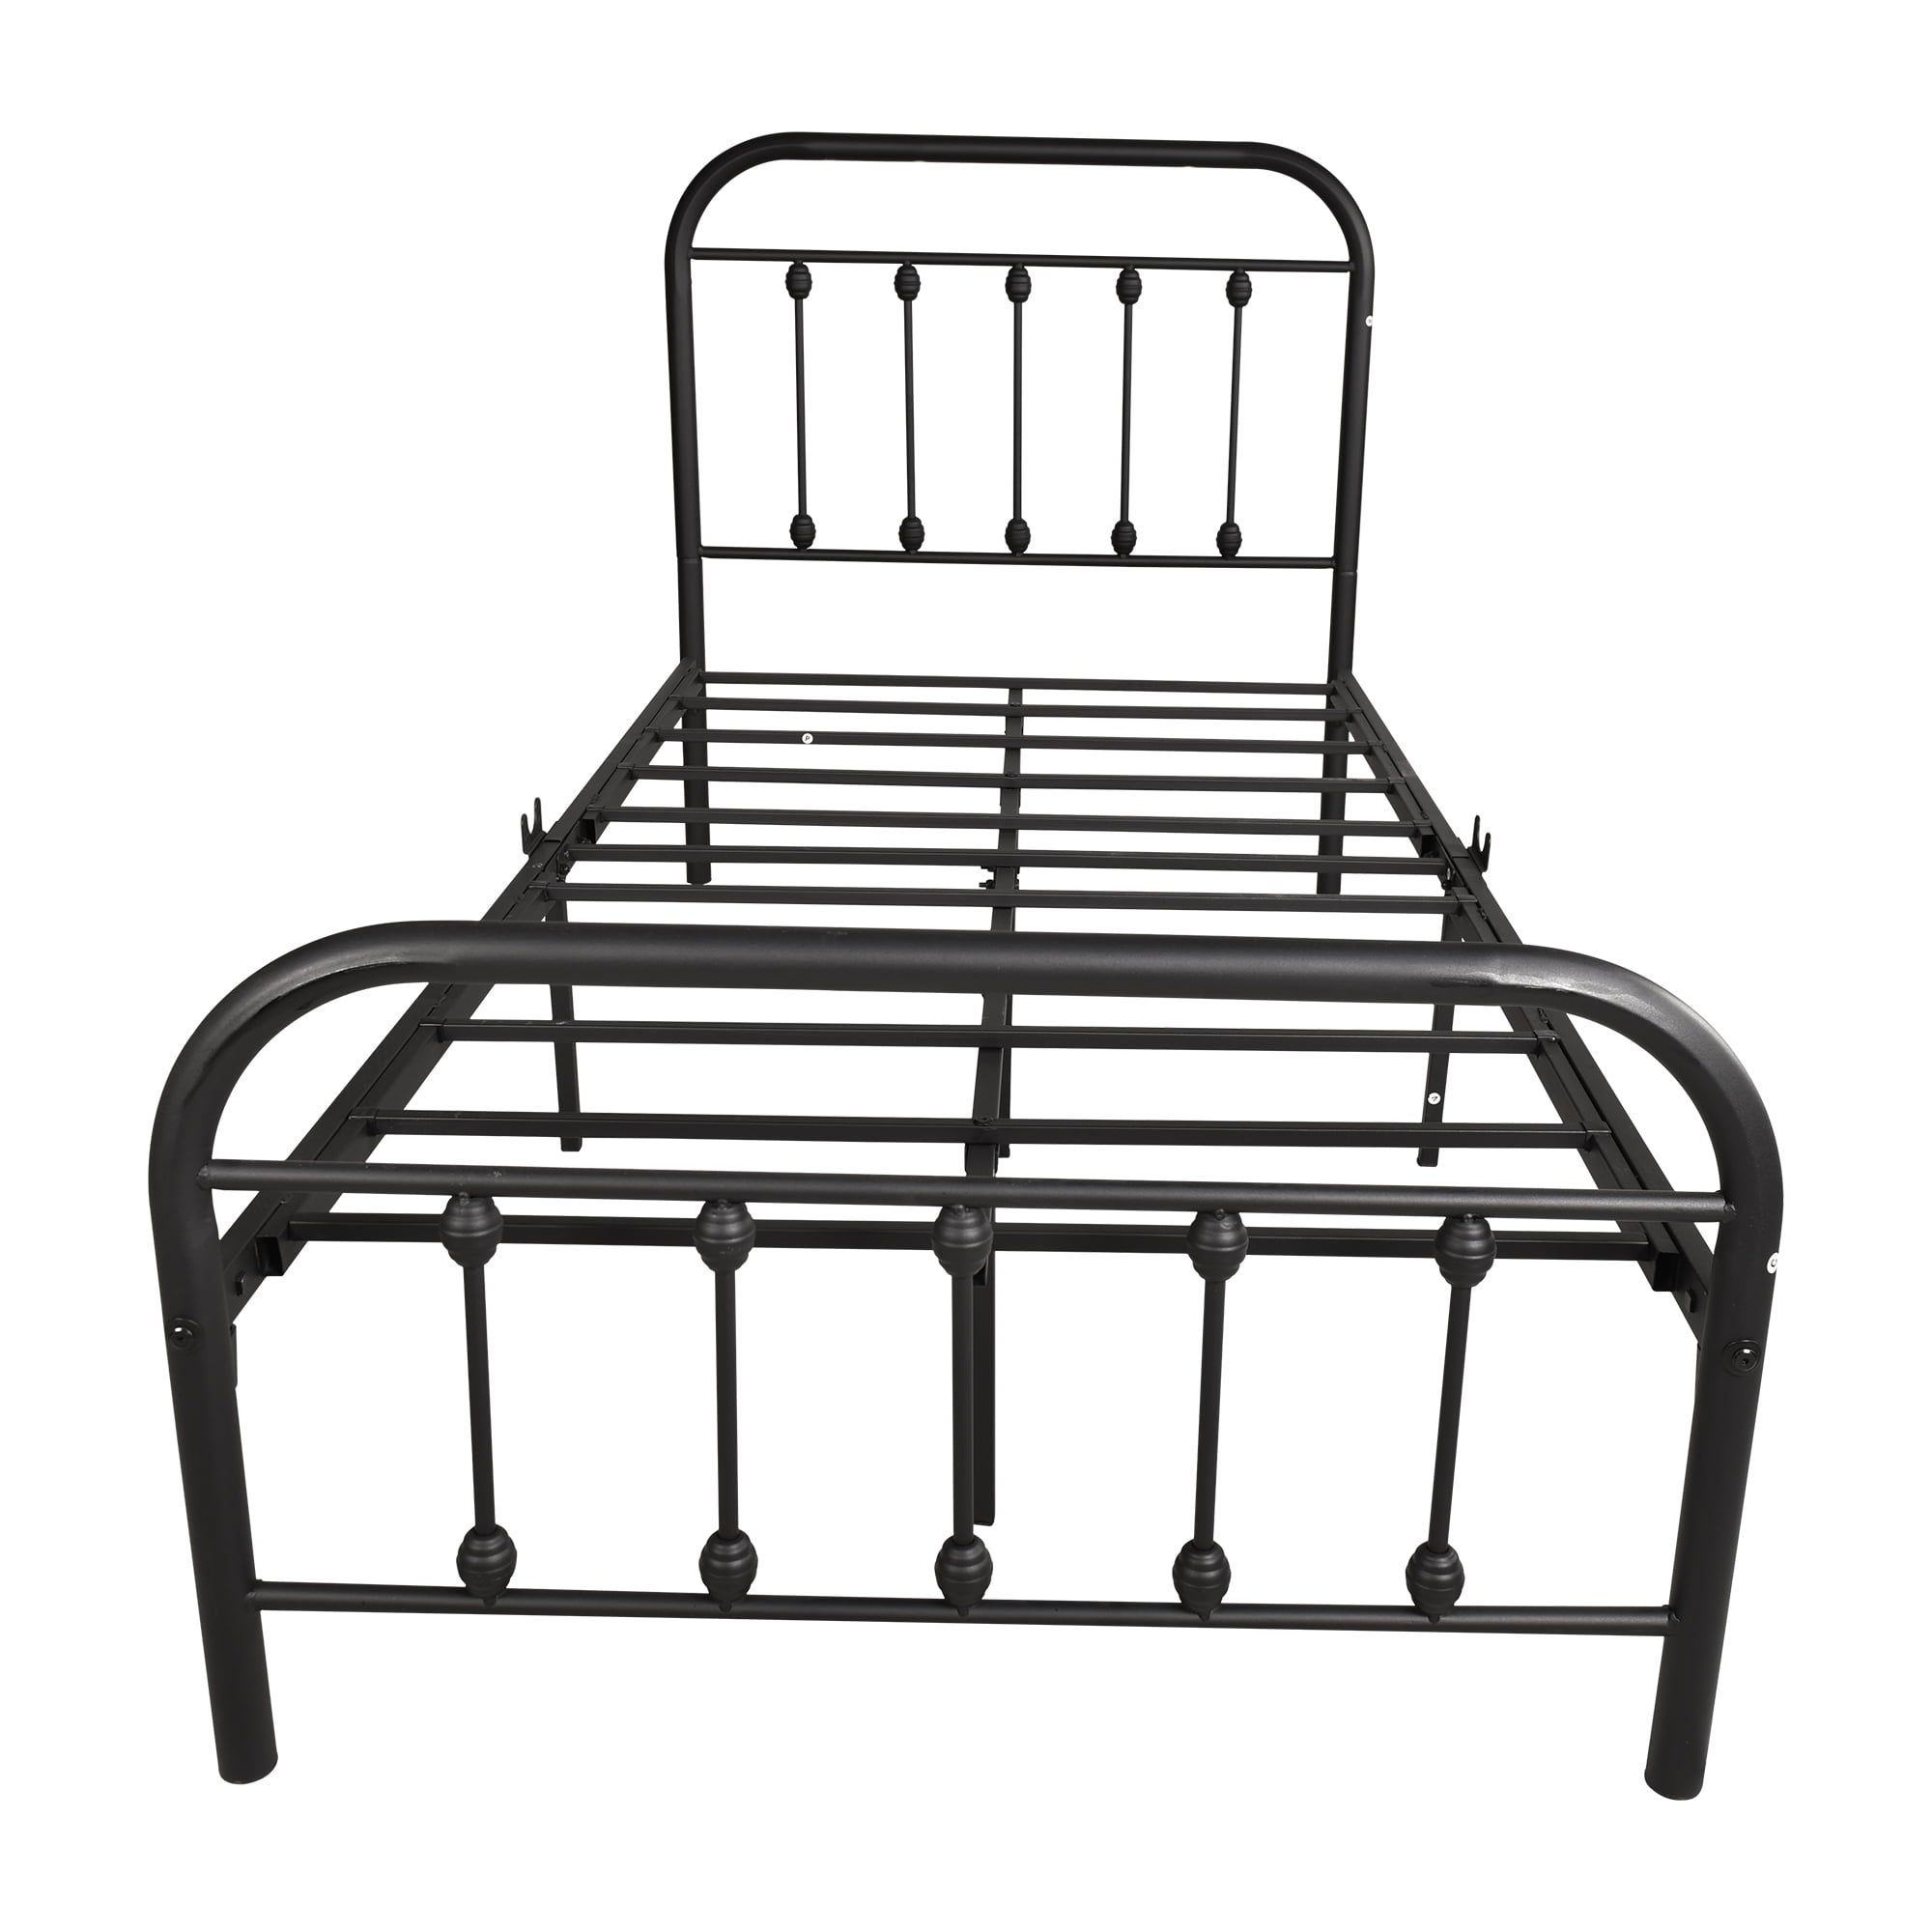 uhomepro Bed Frame with Headboard and Footboard, Metal Twin Size Bed Frame for Adults Teens Kids, Metal Platform Bed Frame, Twin Bed Frame Bedroom Furniture, No Box Spring Needed, Black